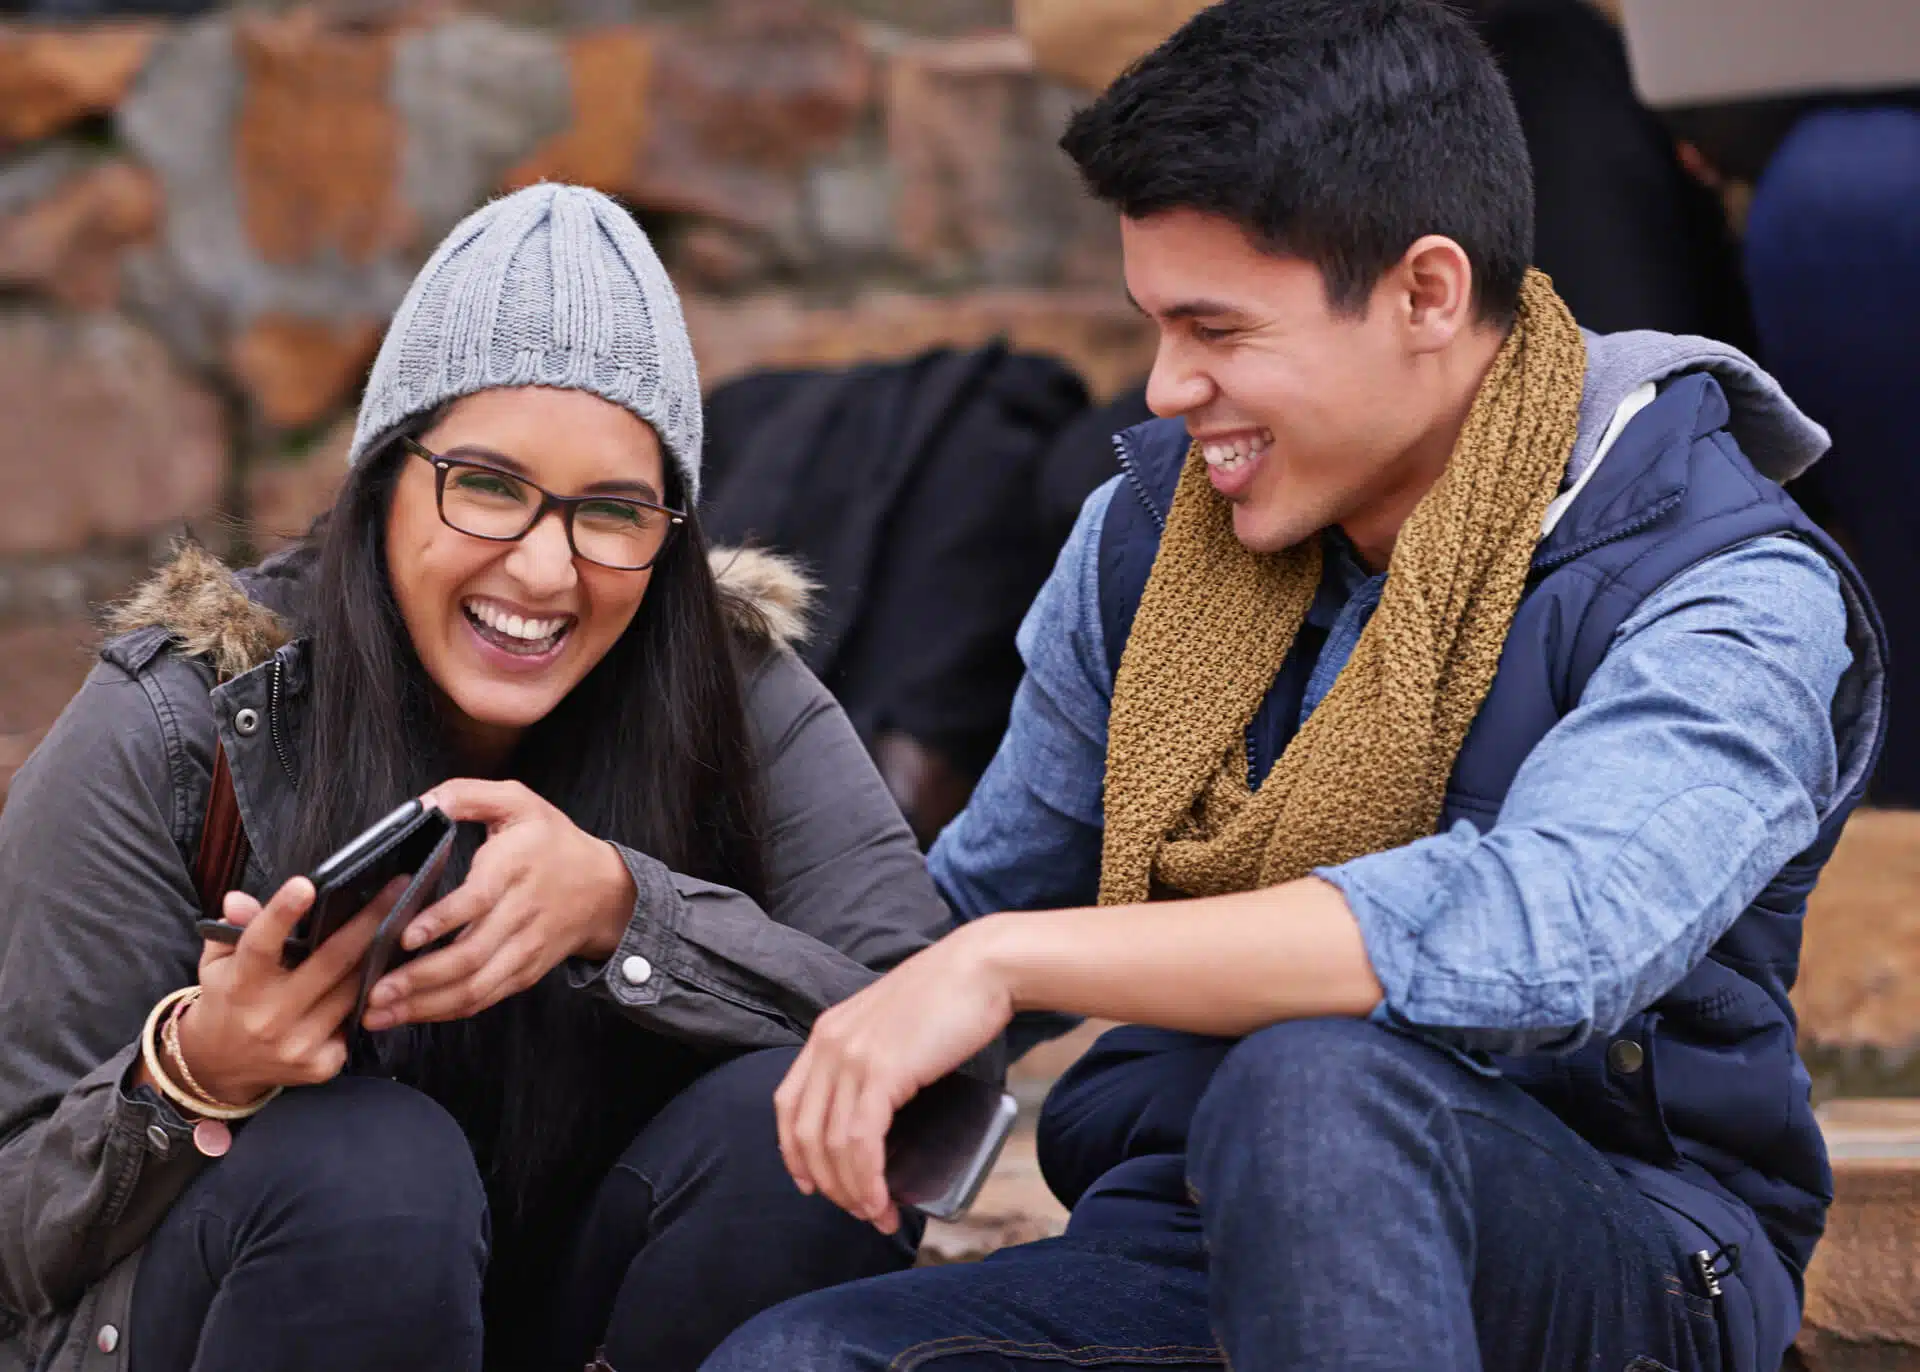 young couple laughing together holding their phones